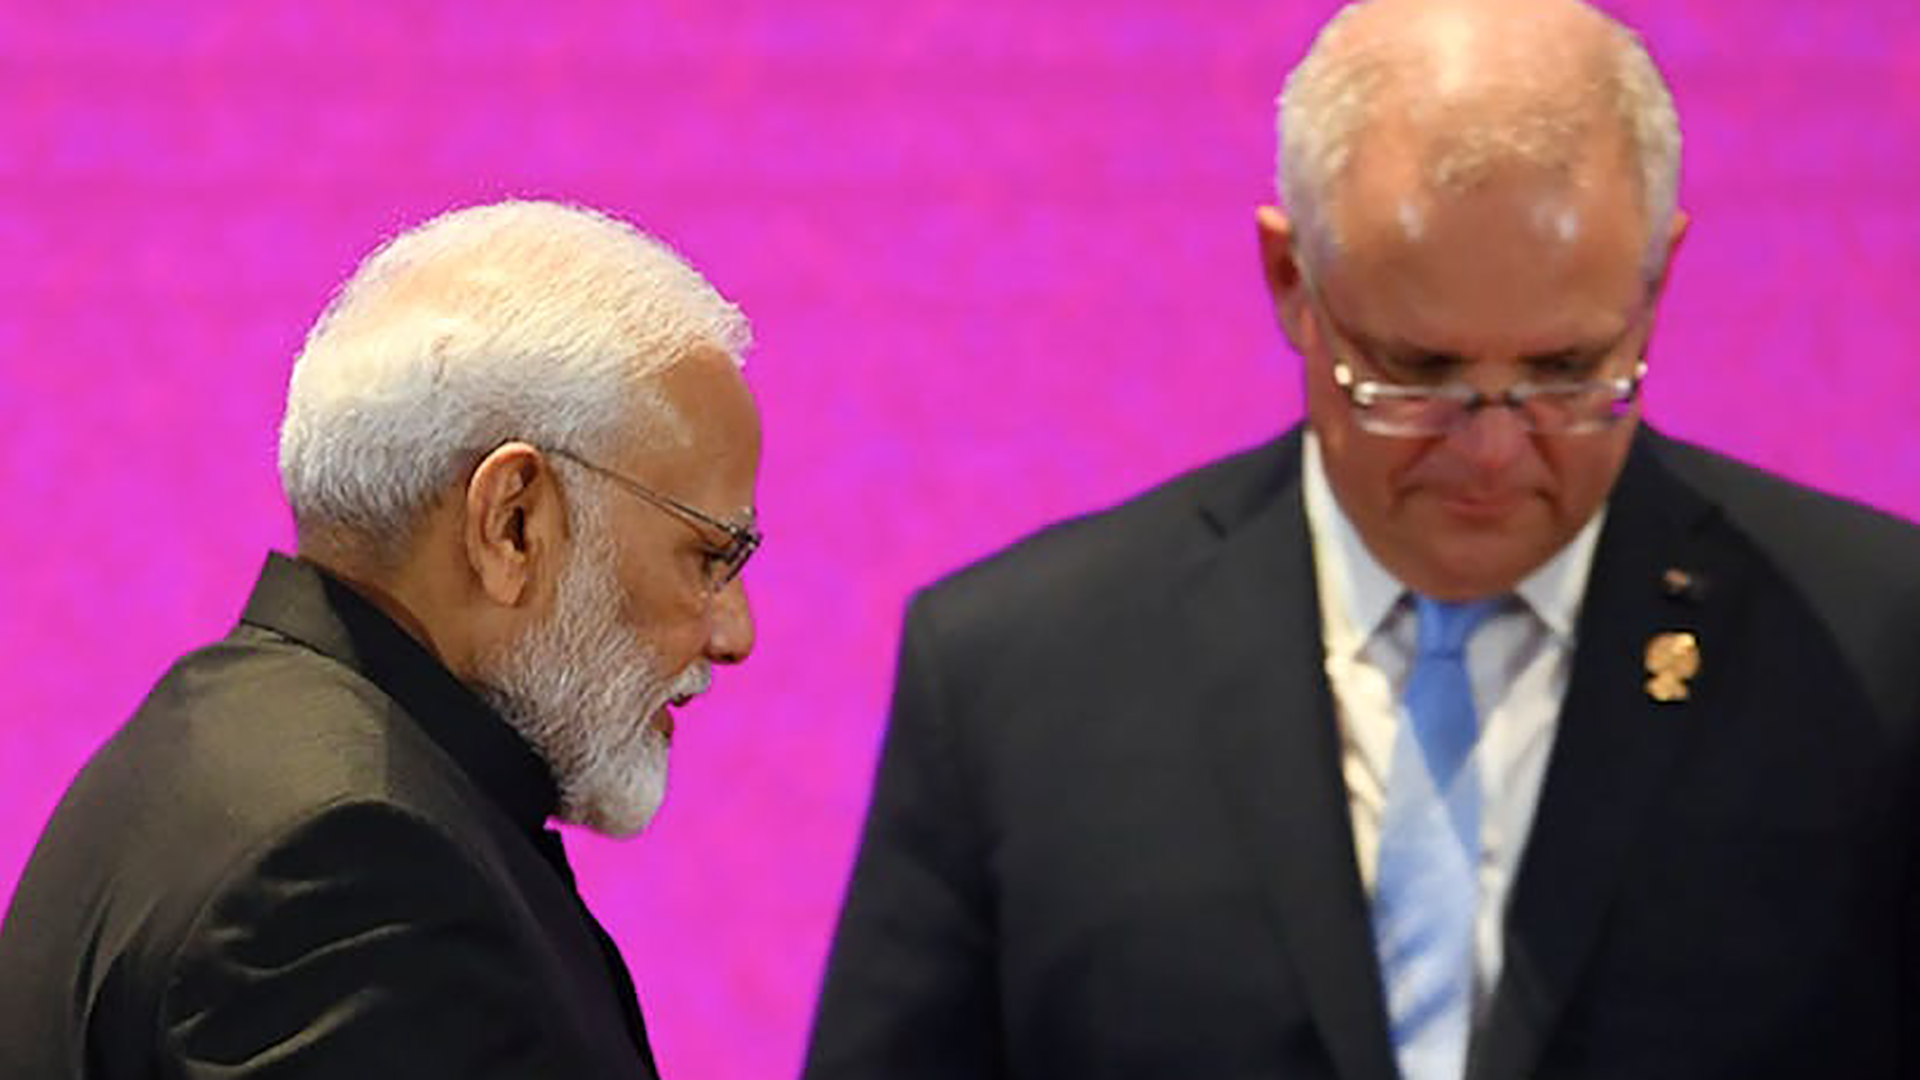 Ties between Delhi and Canberra crucial to Indo-Pacific security